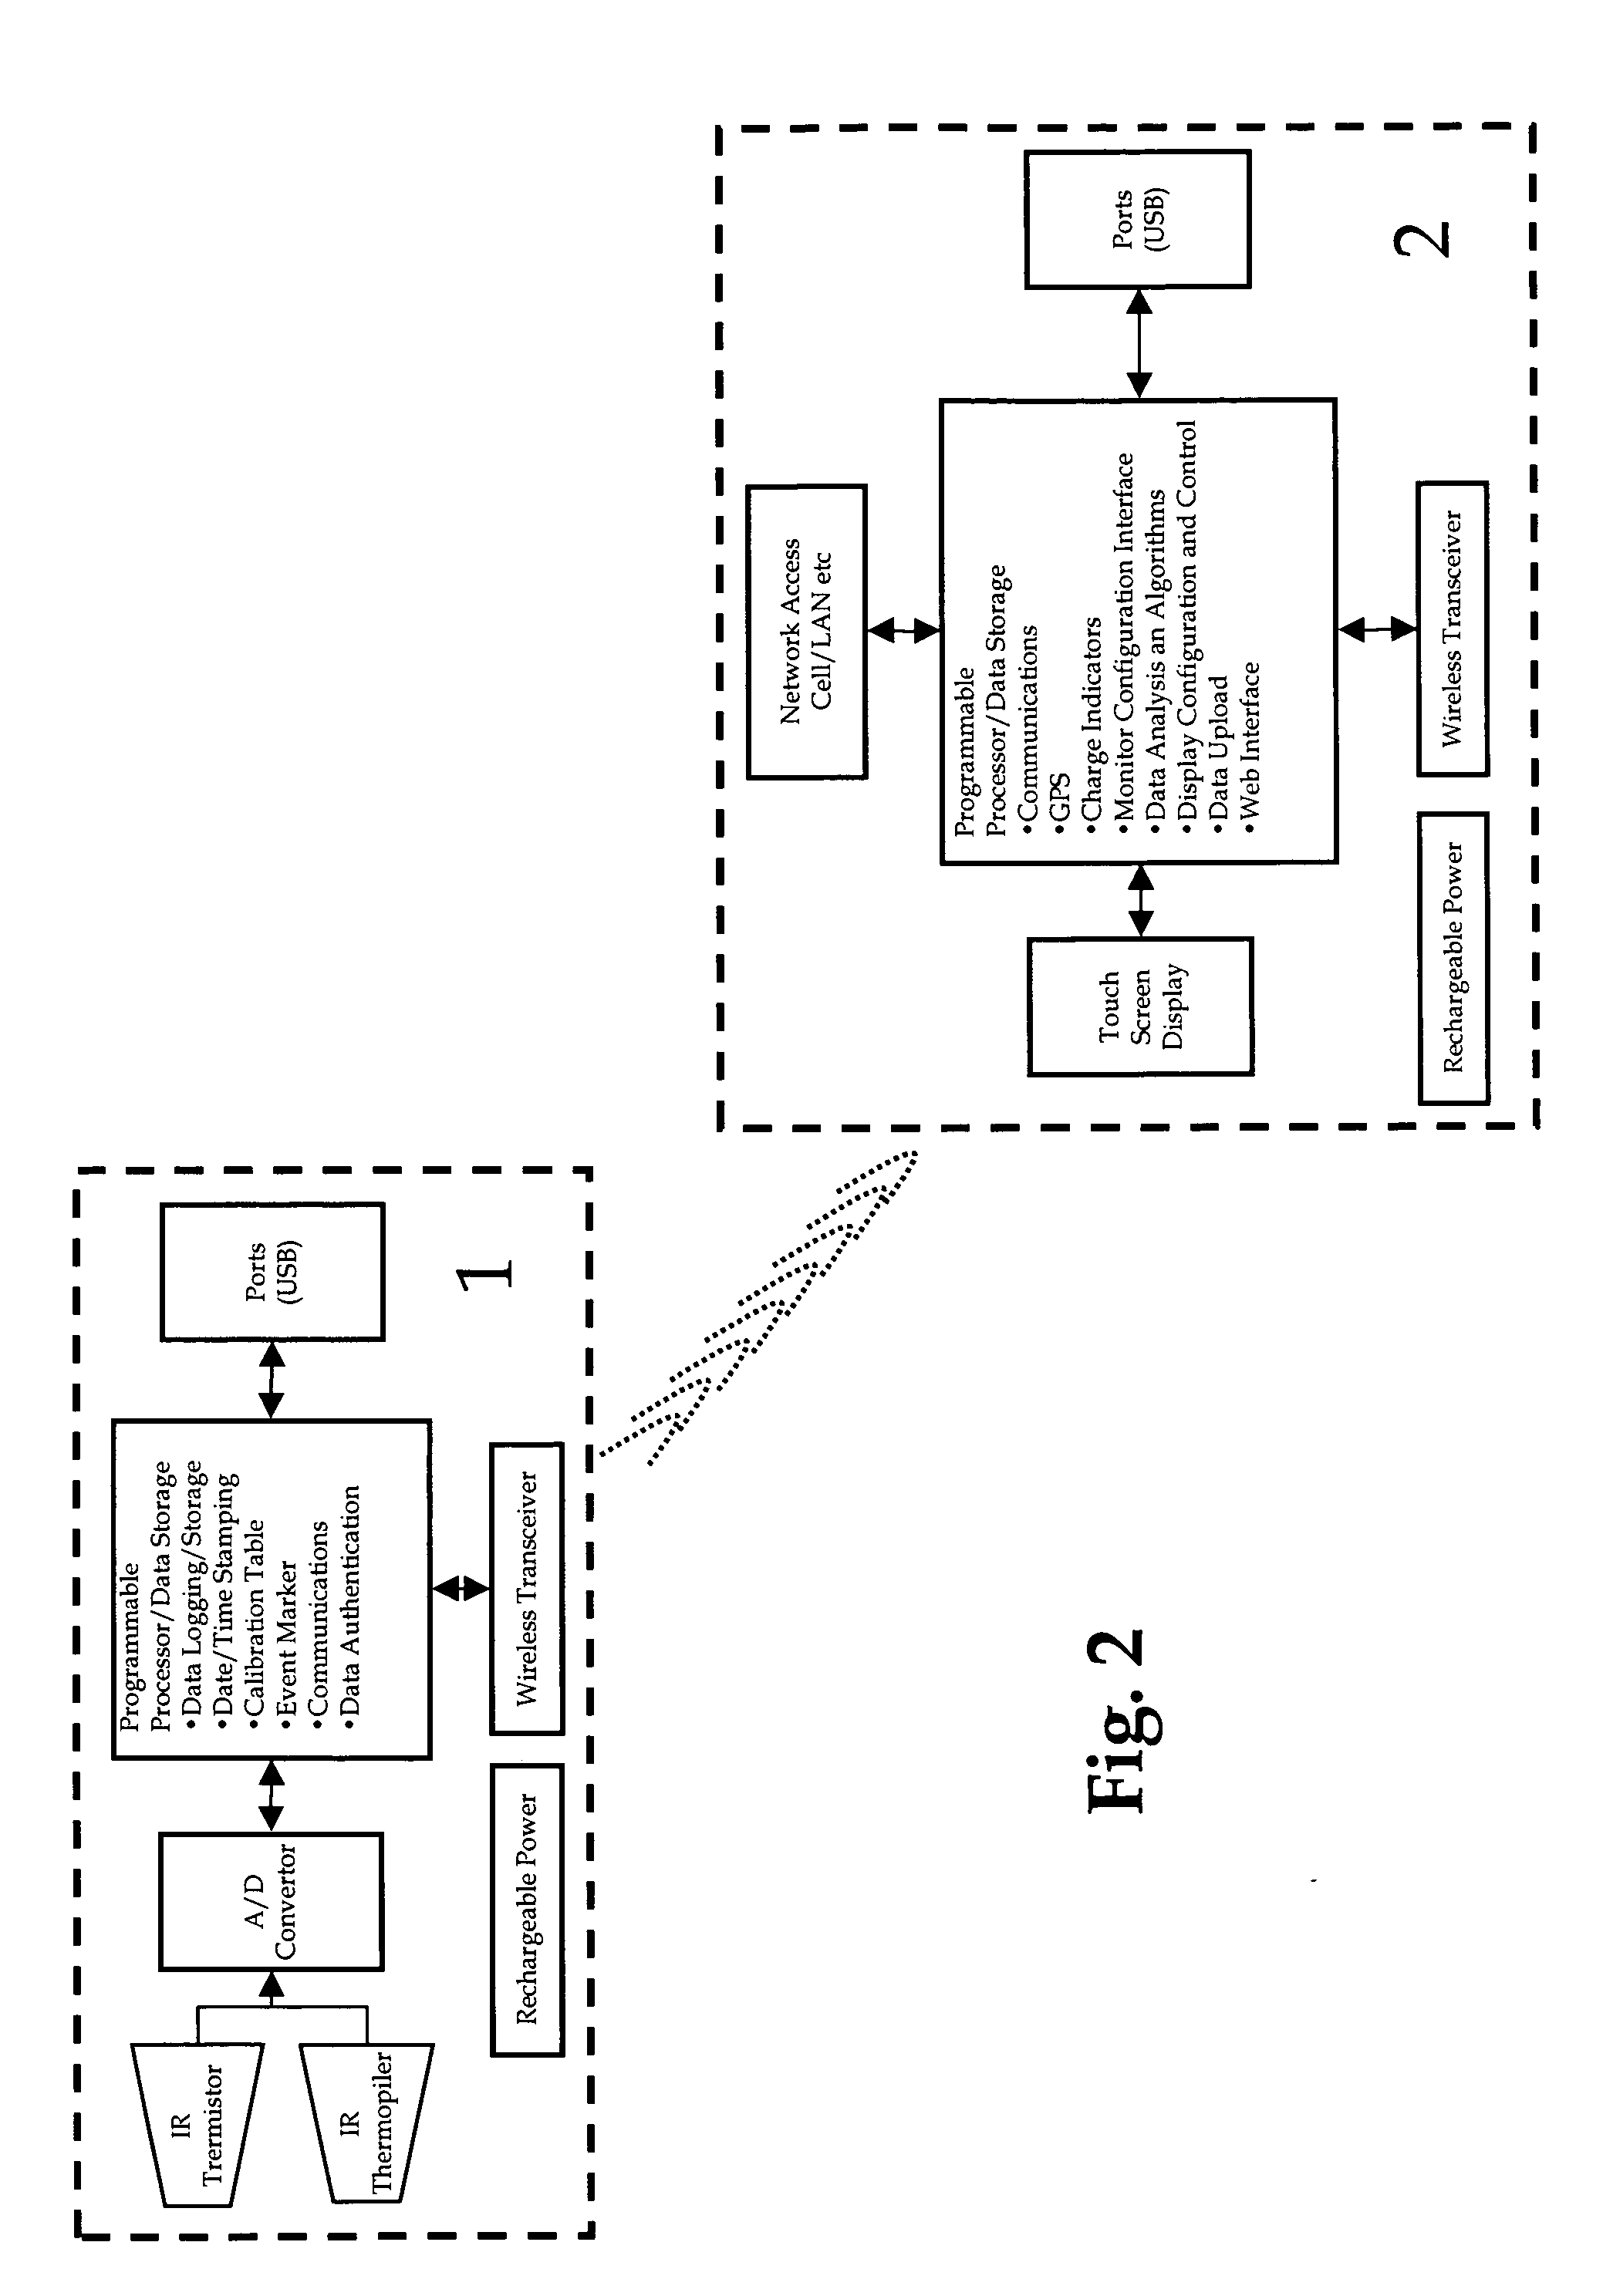 System for circadian rhythm monitor with synchrony and activity planning